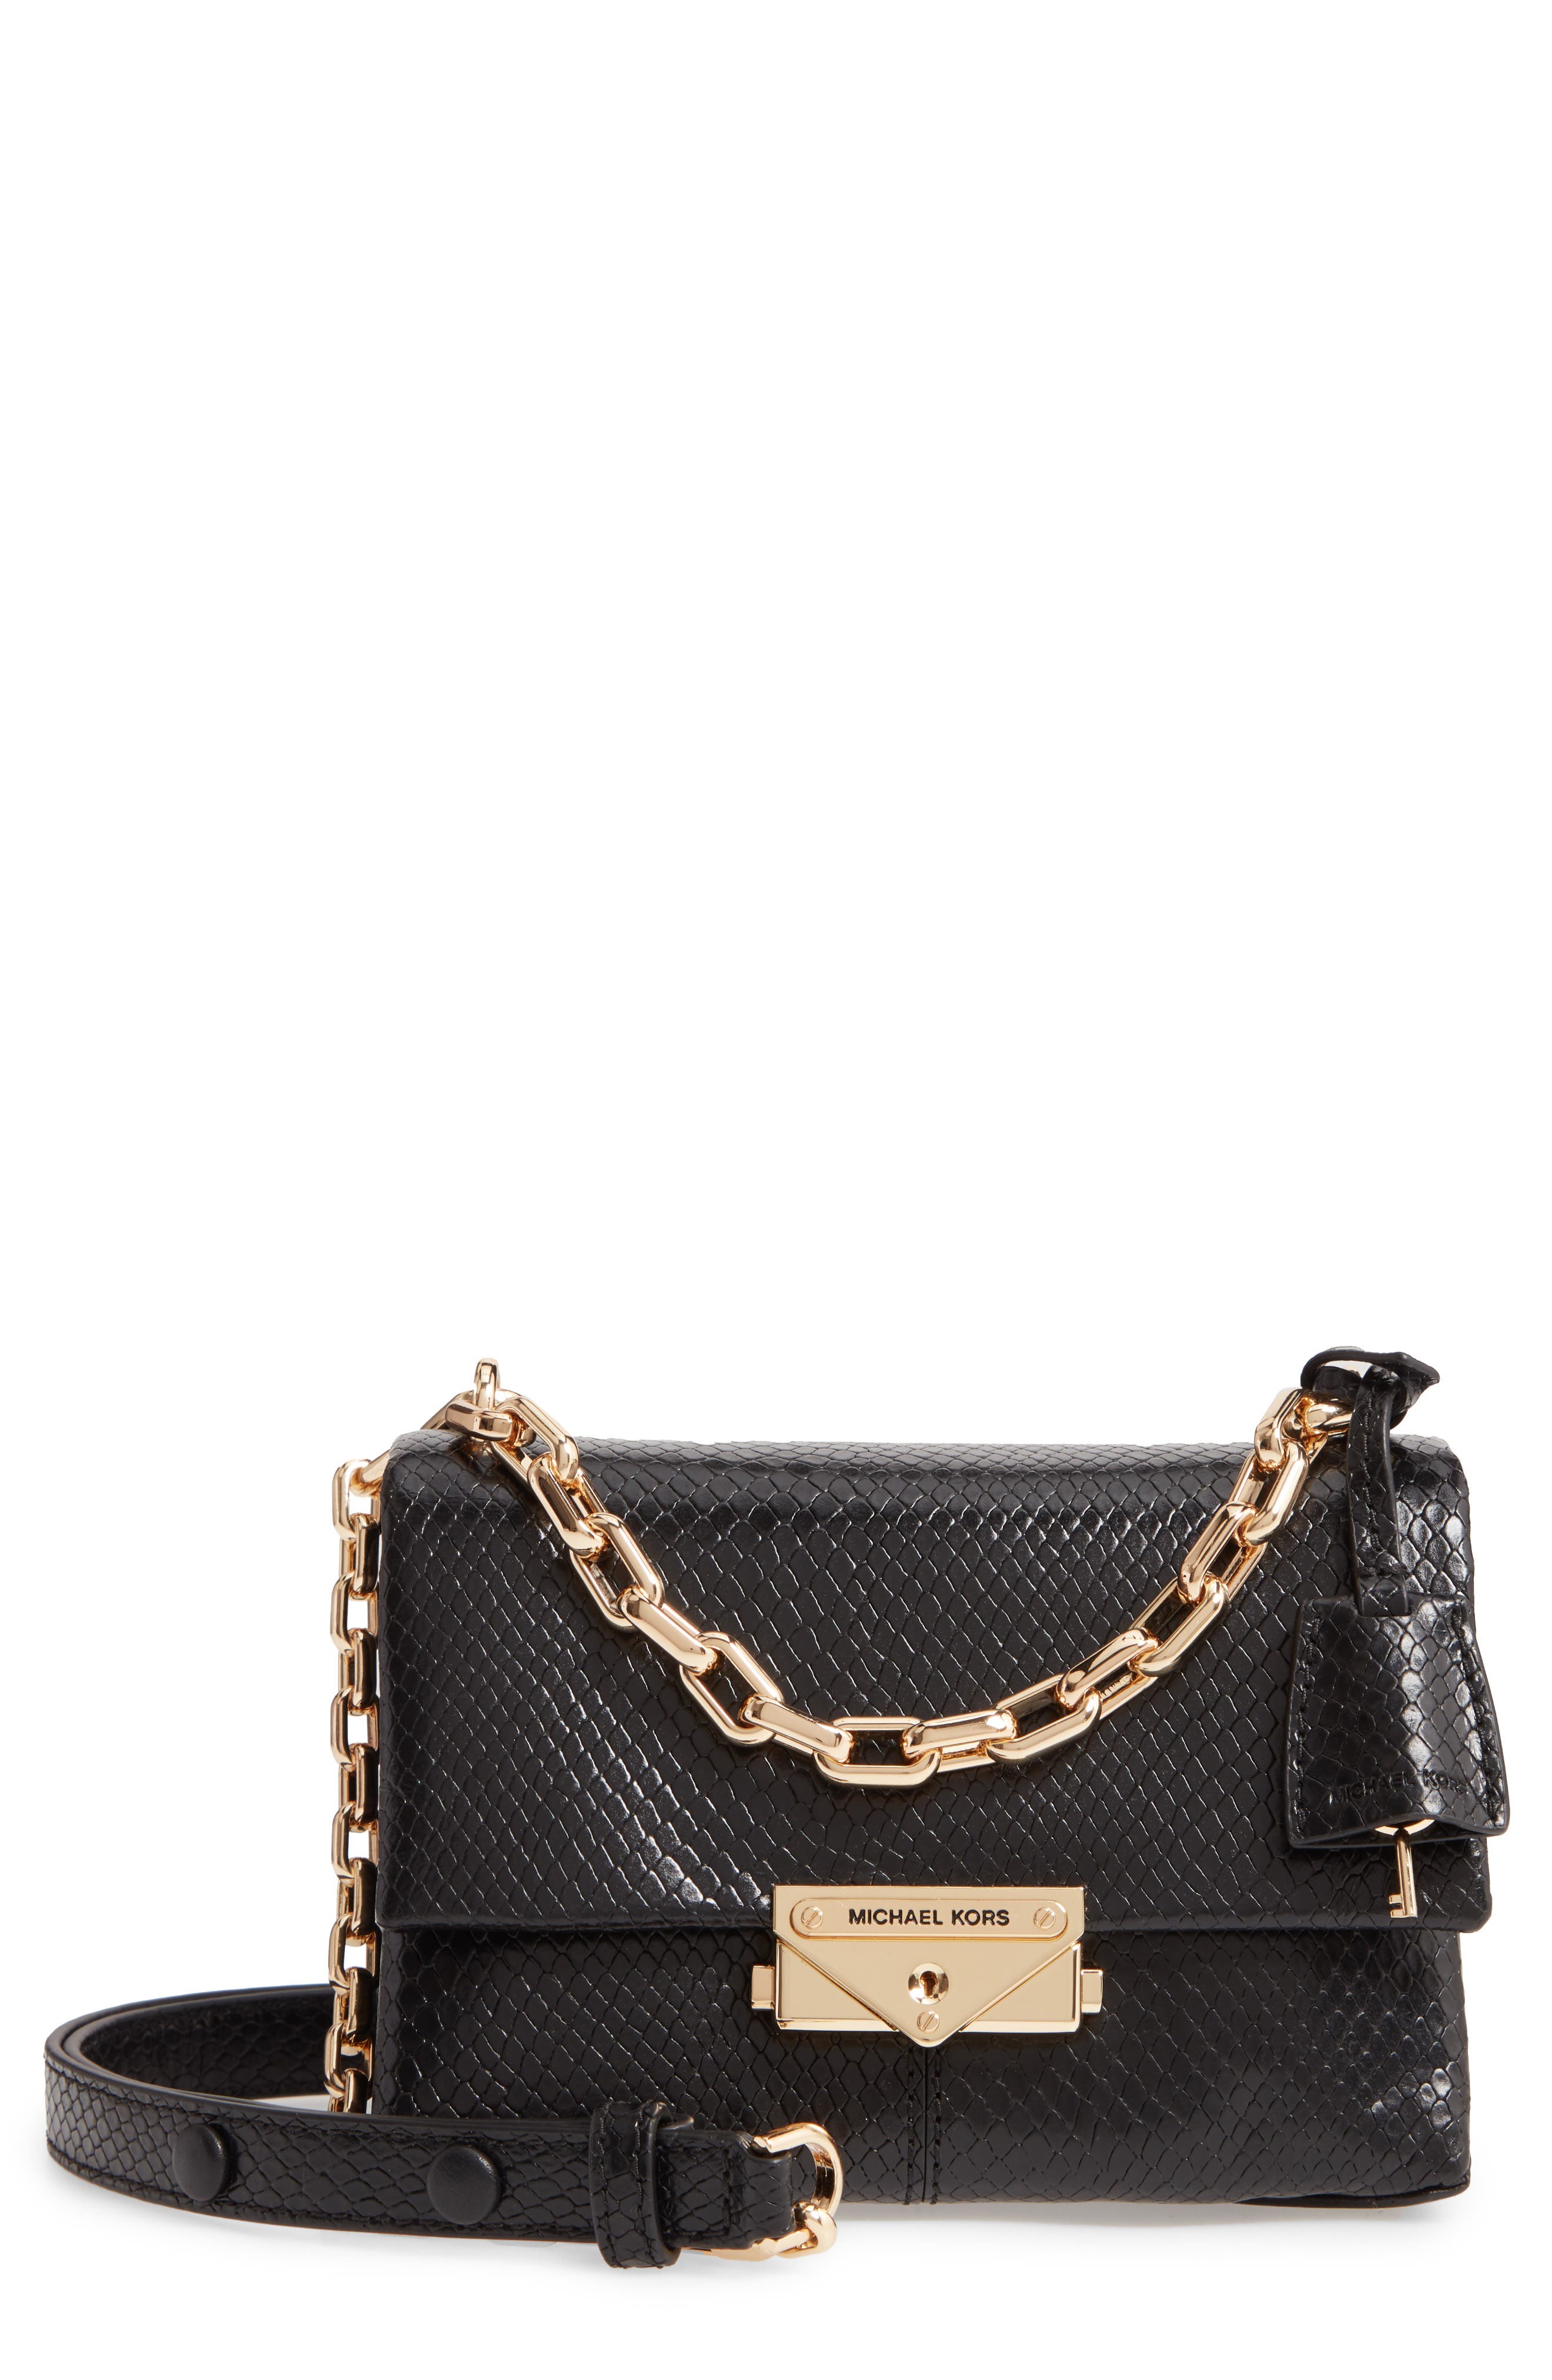 michael kors small purse with chain strap